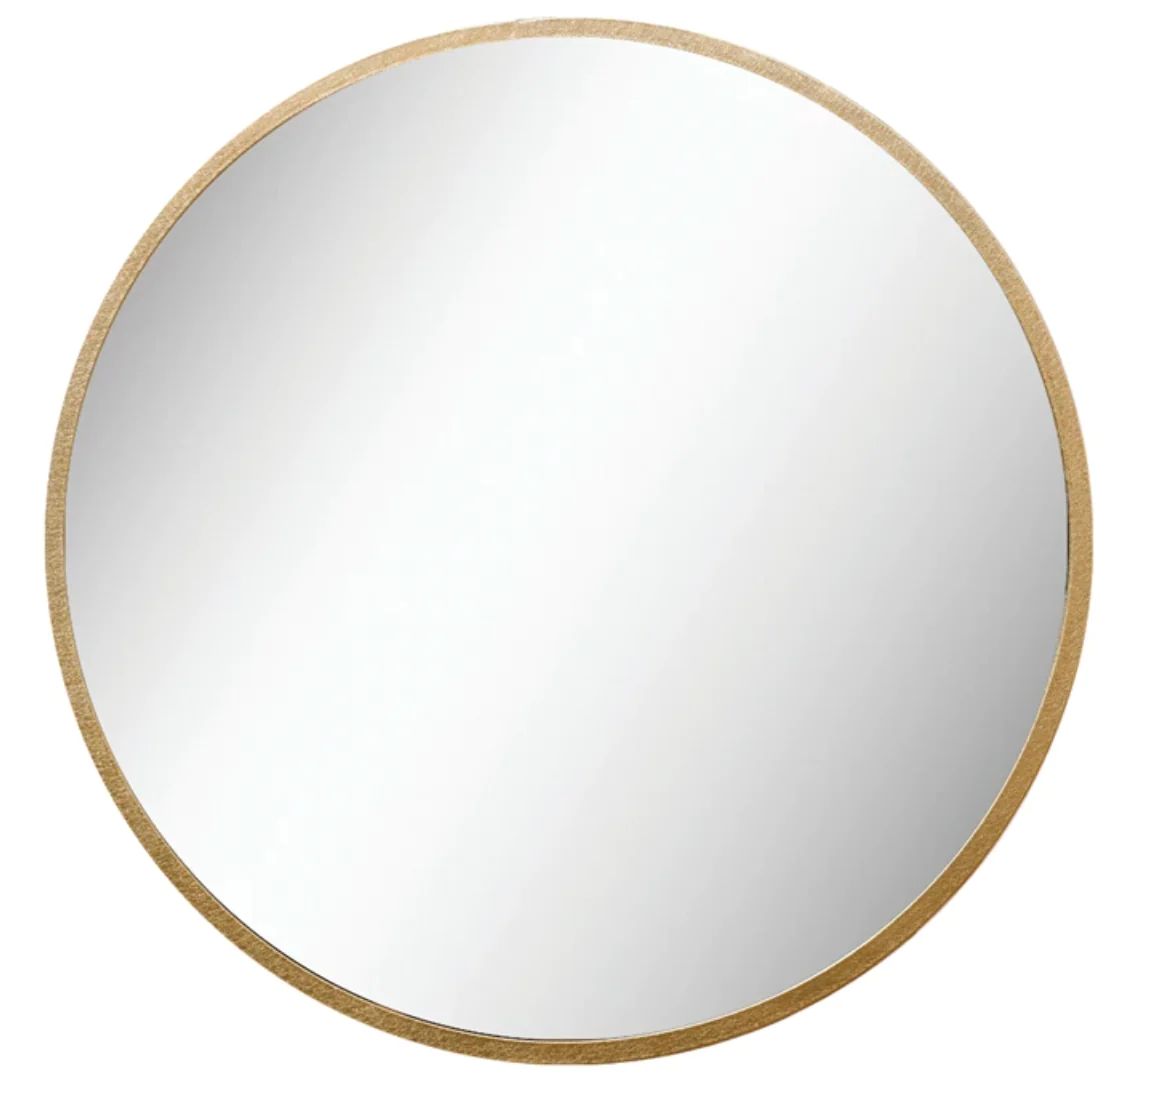 Raleigh Mirror | Stoffer Home